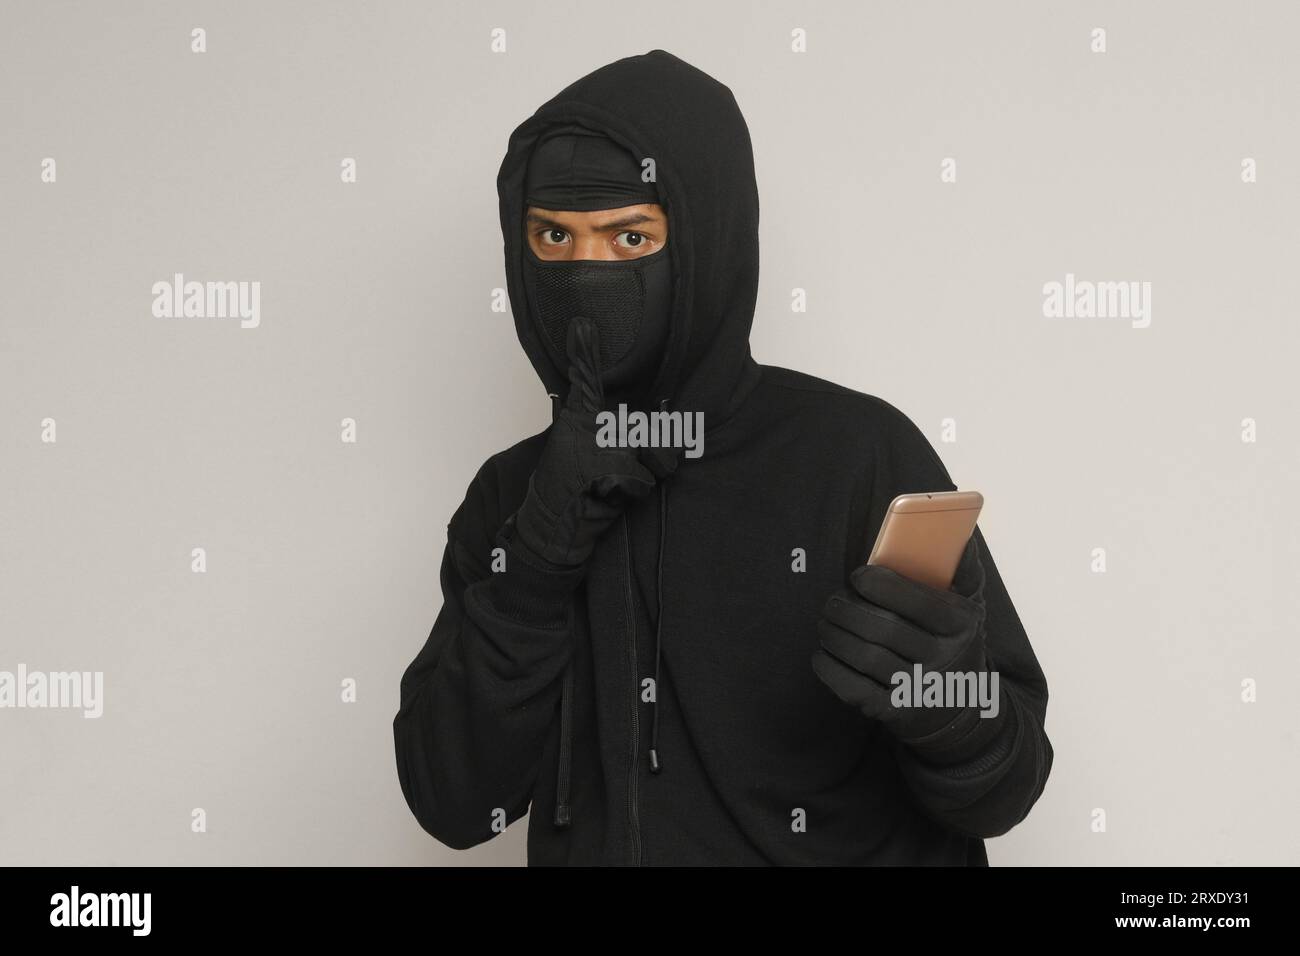 Portrait of mysterious man wearing black hoodie and mask doing hacking activity on mobile phone, hacker holding a smartphone. Isolated image on gray b Stock Photo